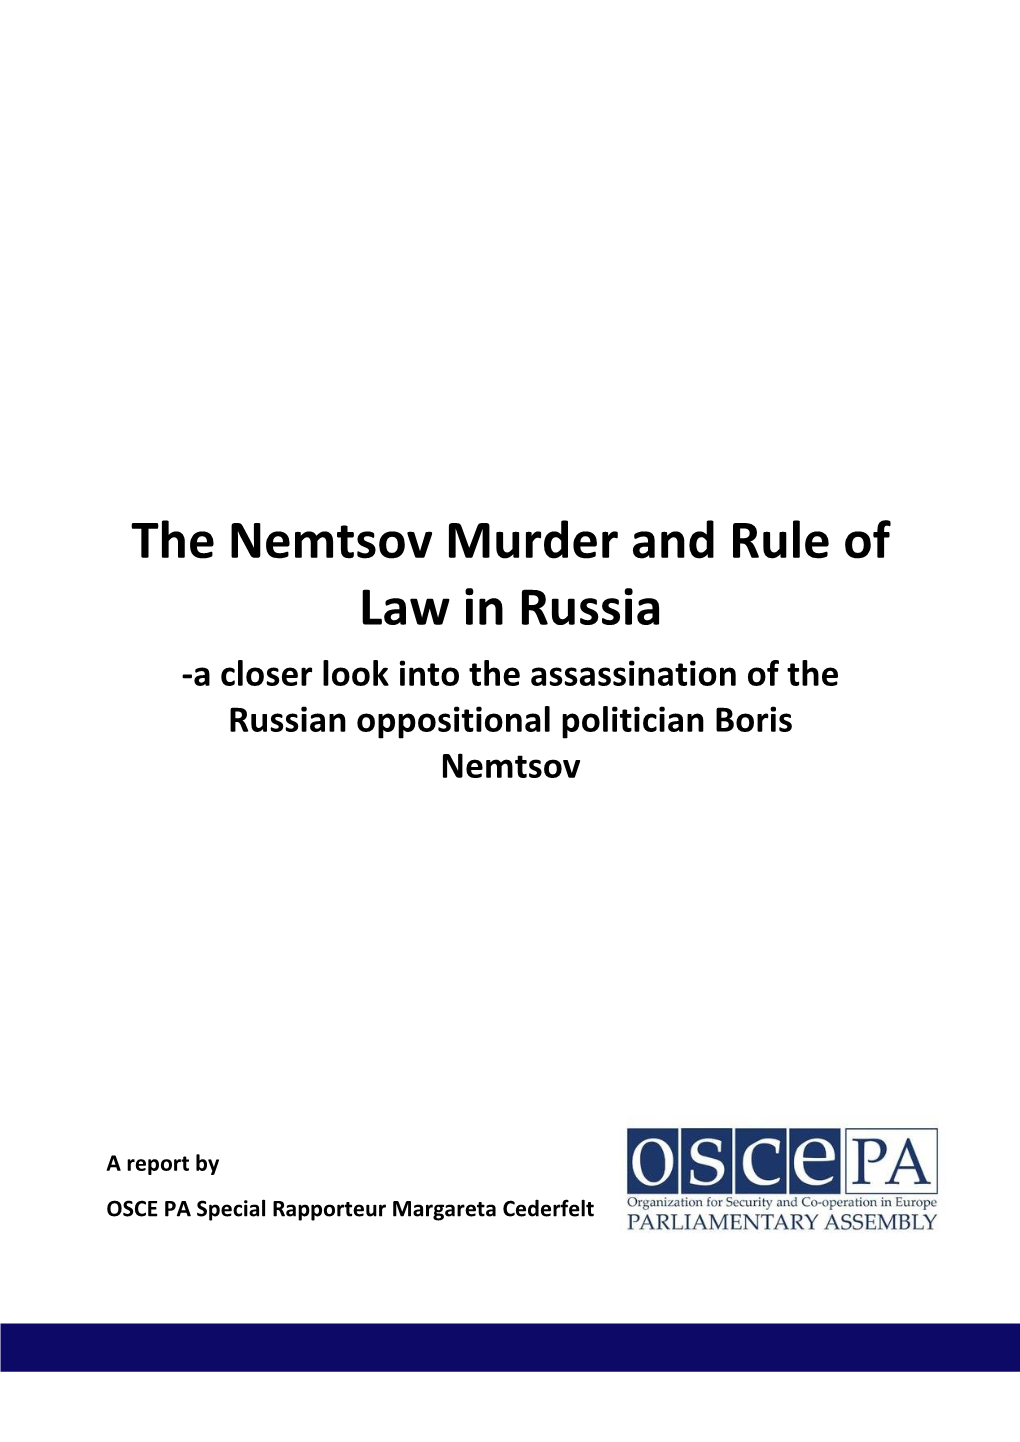 The Nemtsov Murder and Rule of Law in Russia -A Closer Look Into the Assassination of the Russian Oppositional Politician Boris Nemtsov